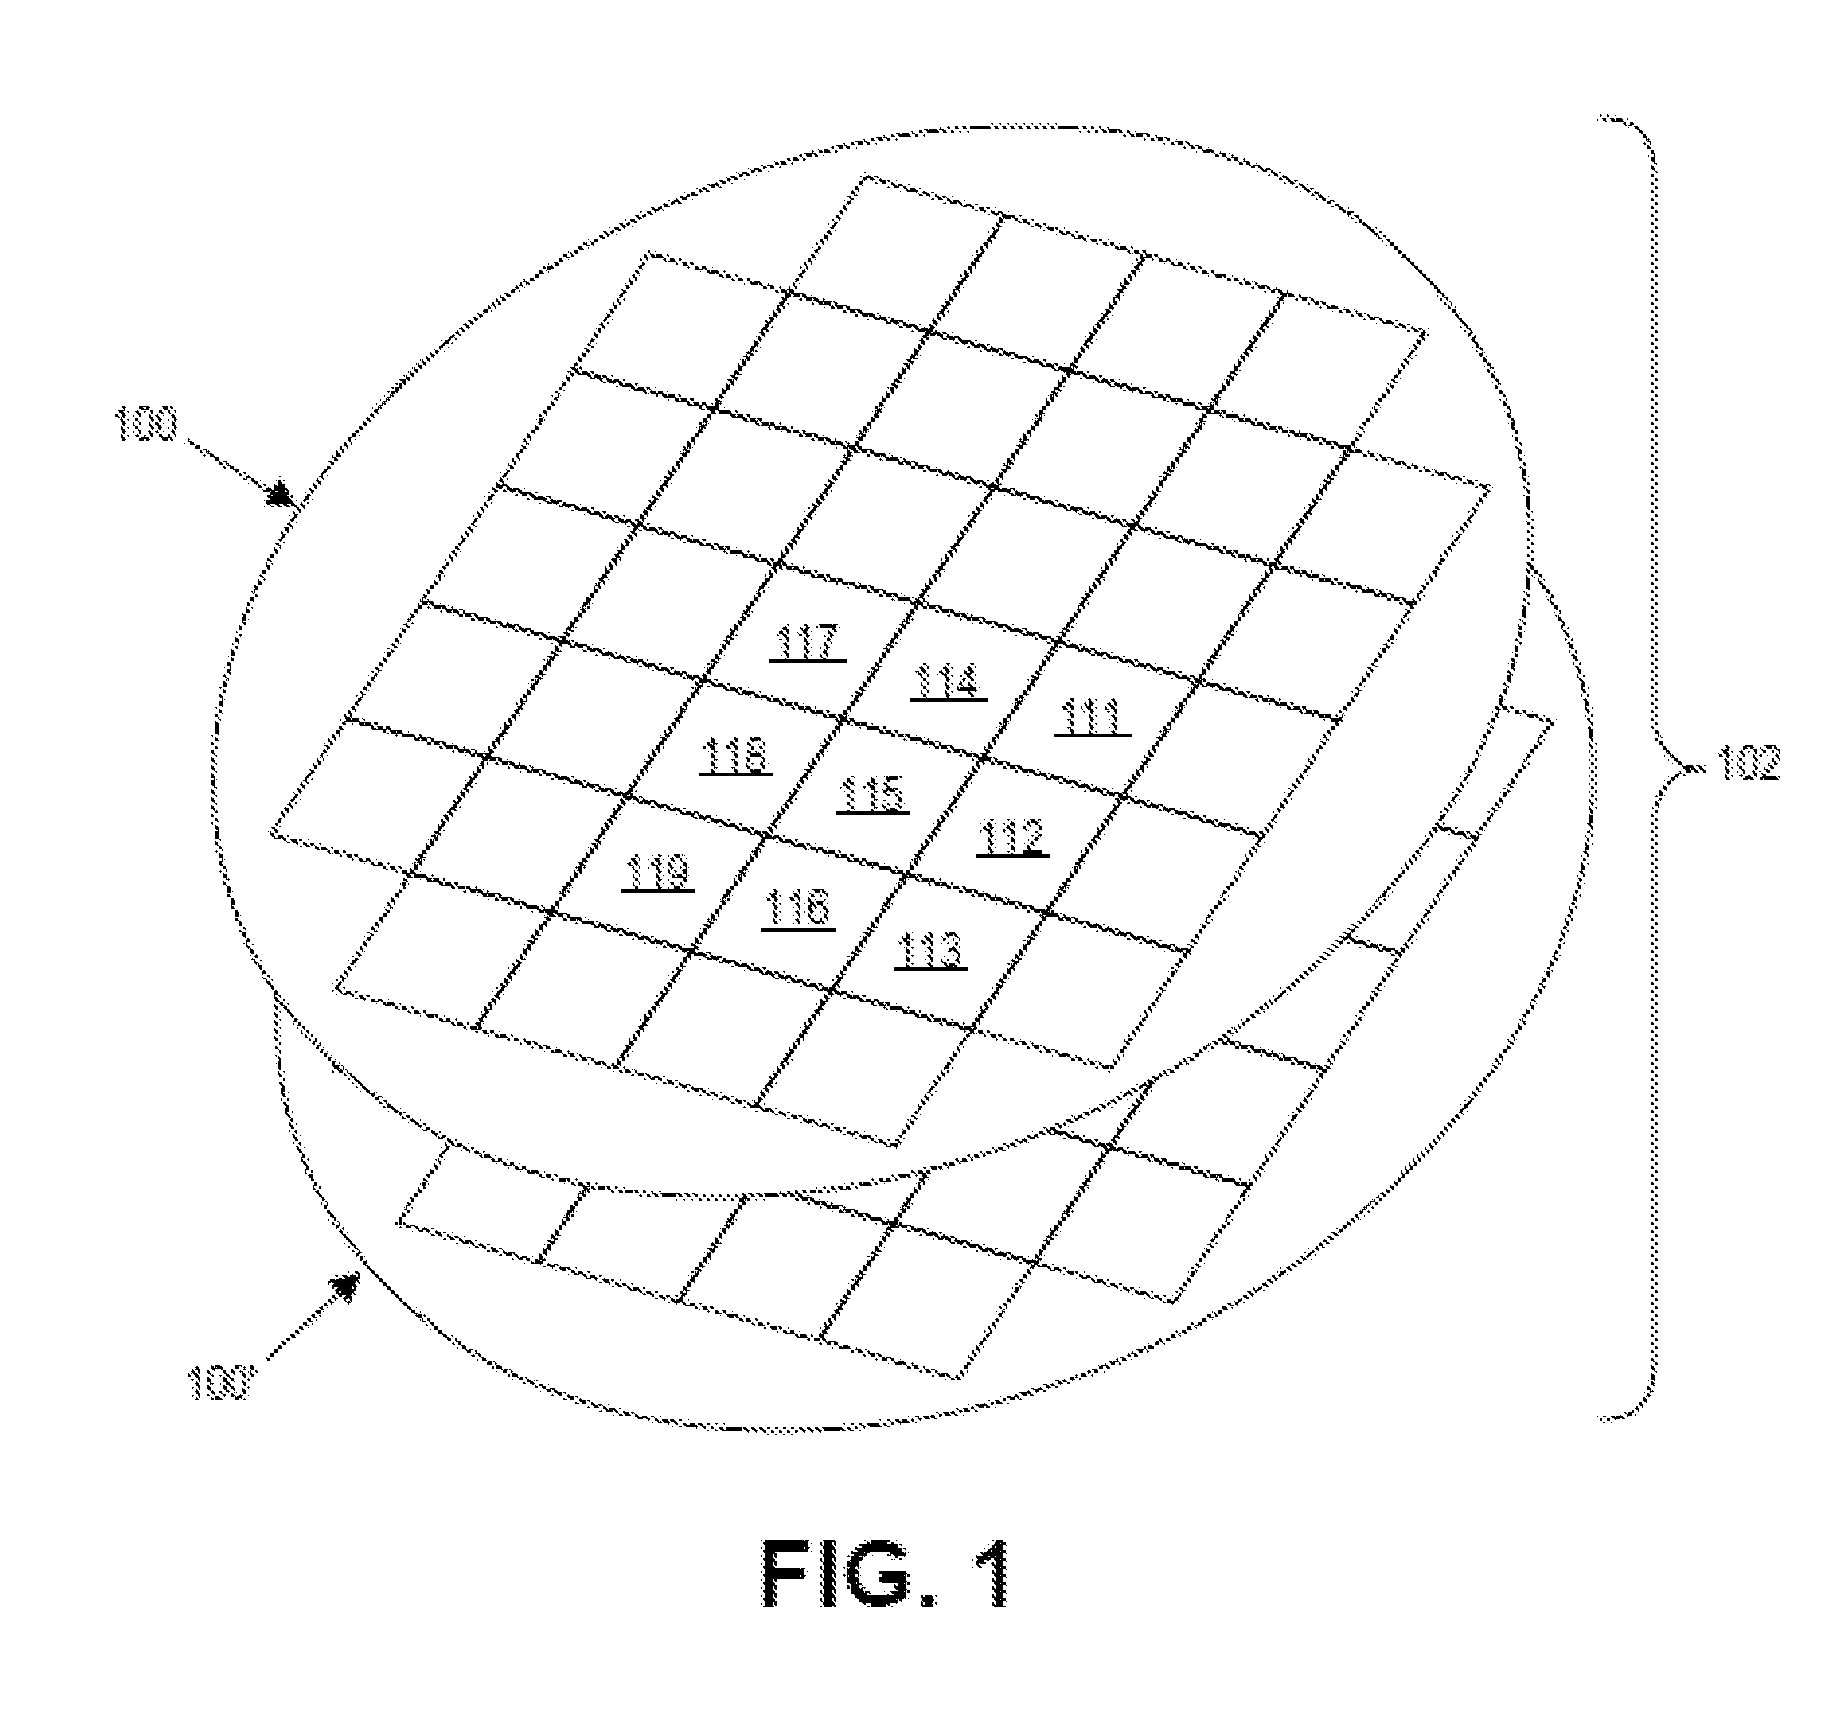 Stacked chip image sensor with light-sensitive circuit elements on the bottom chip